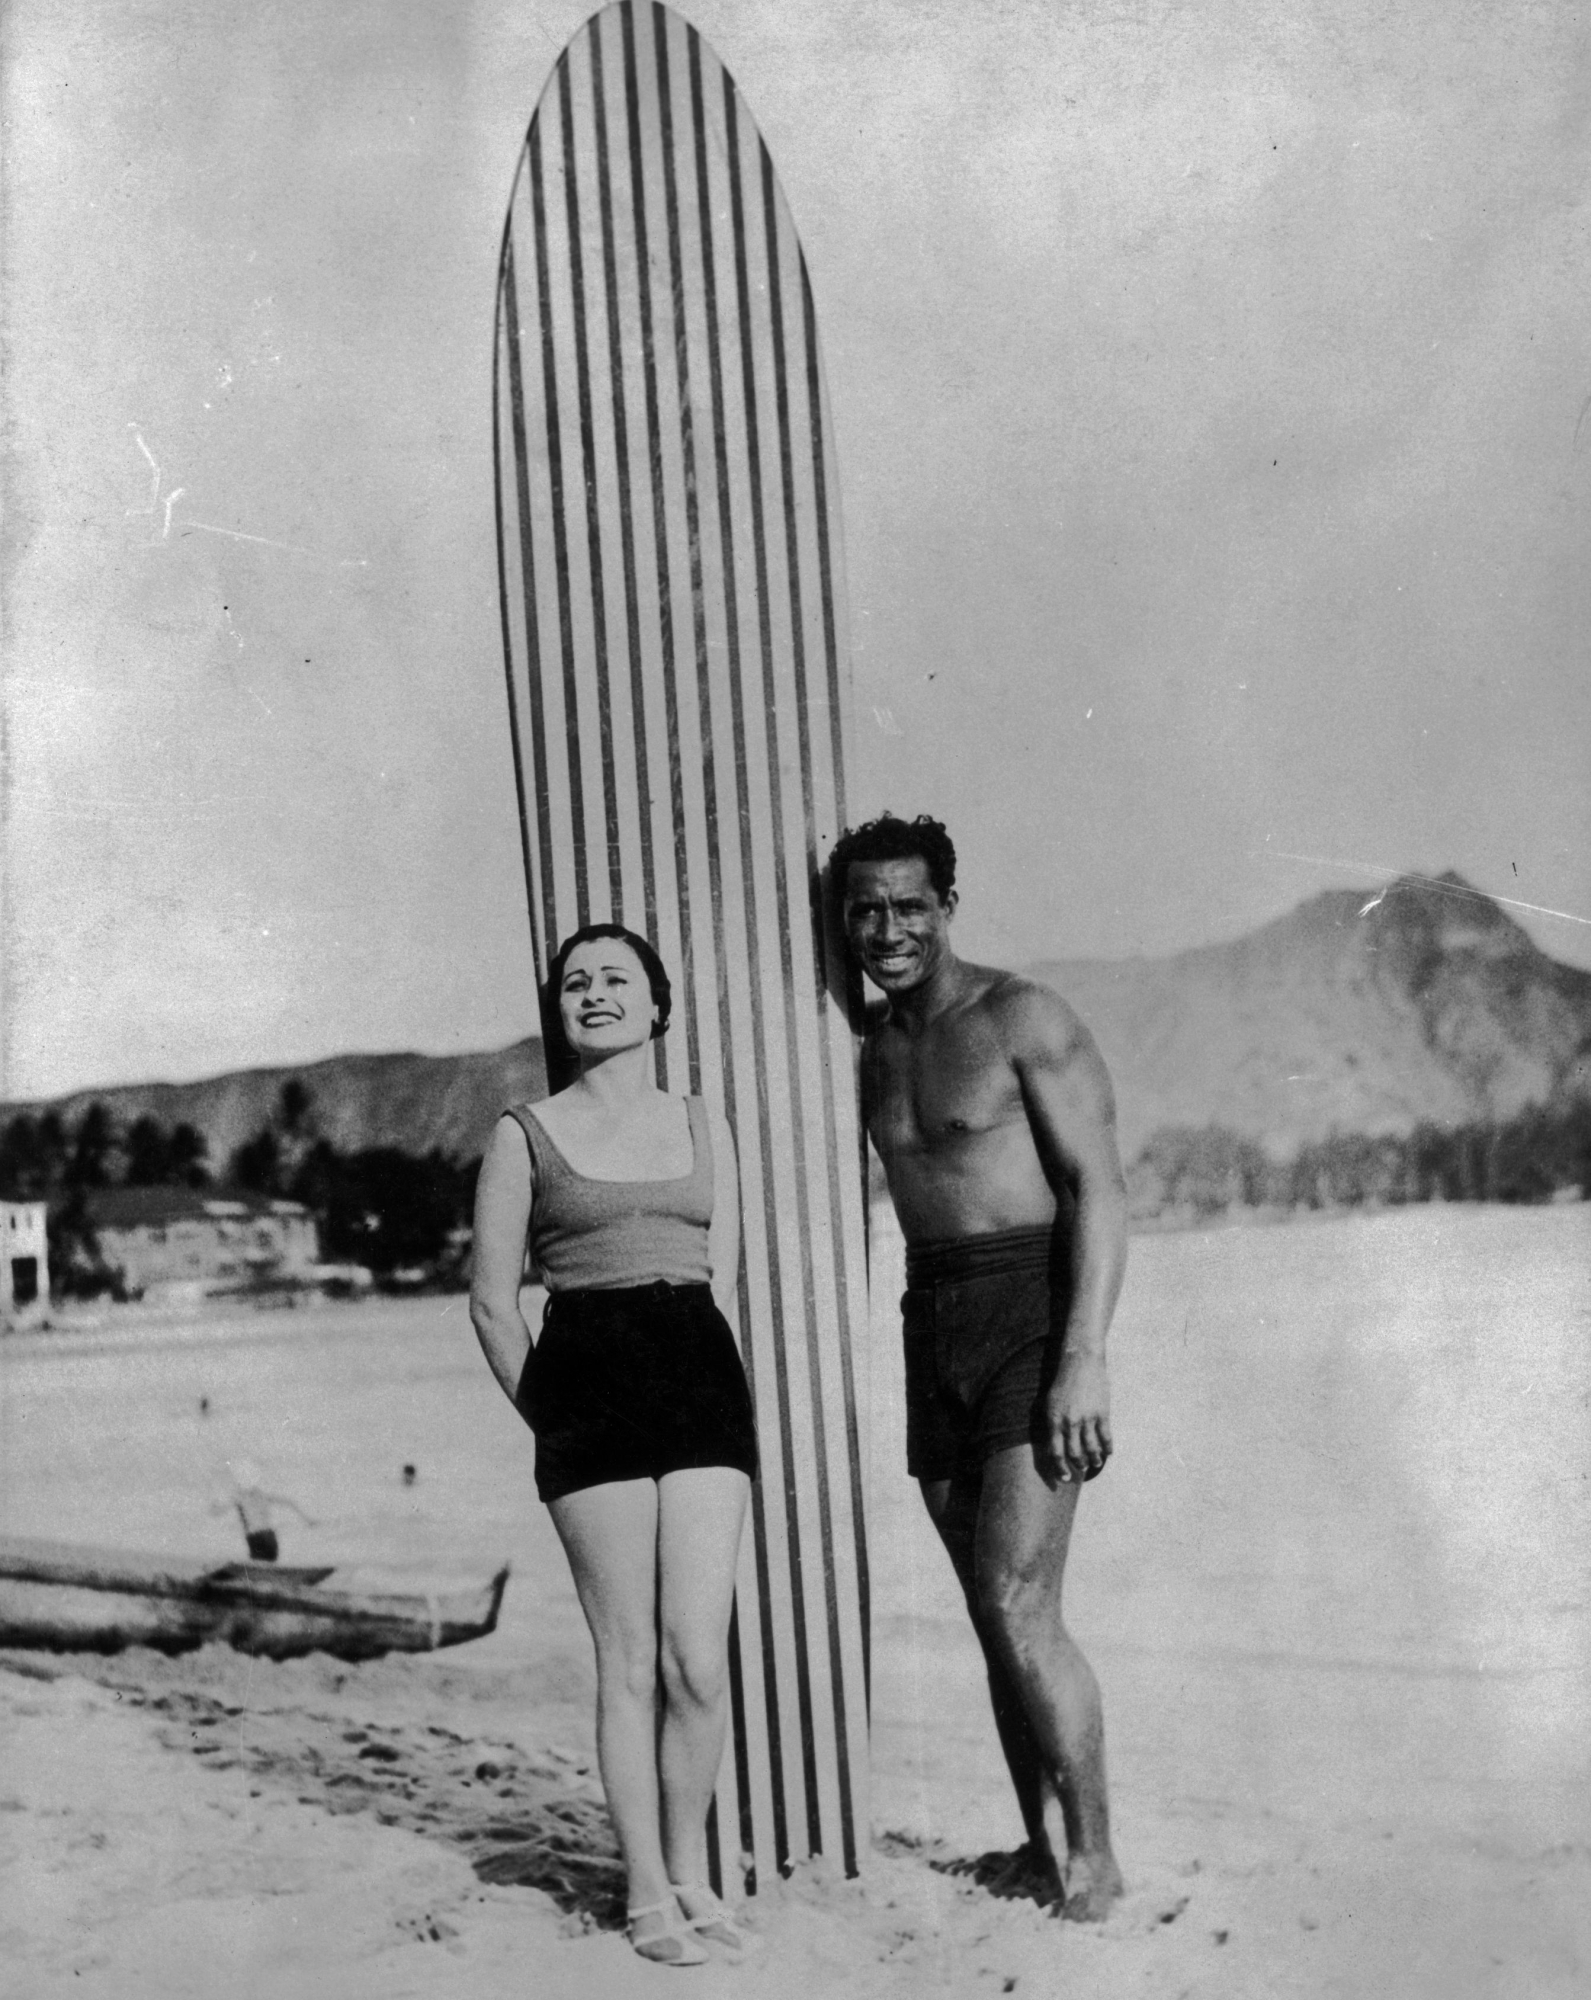 Duke Kahanamoku posa in spiaggia nel 1935. Ph. General Photographic Agency/Getty Images